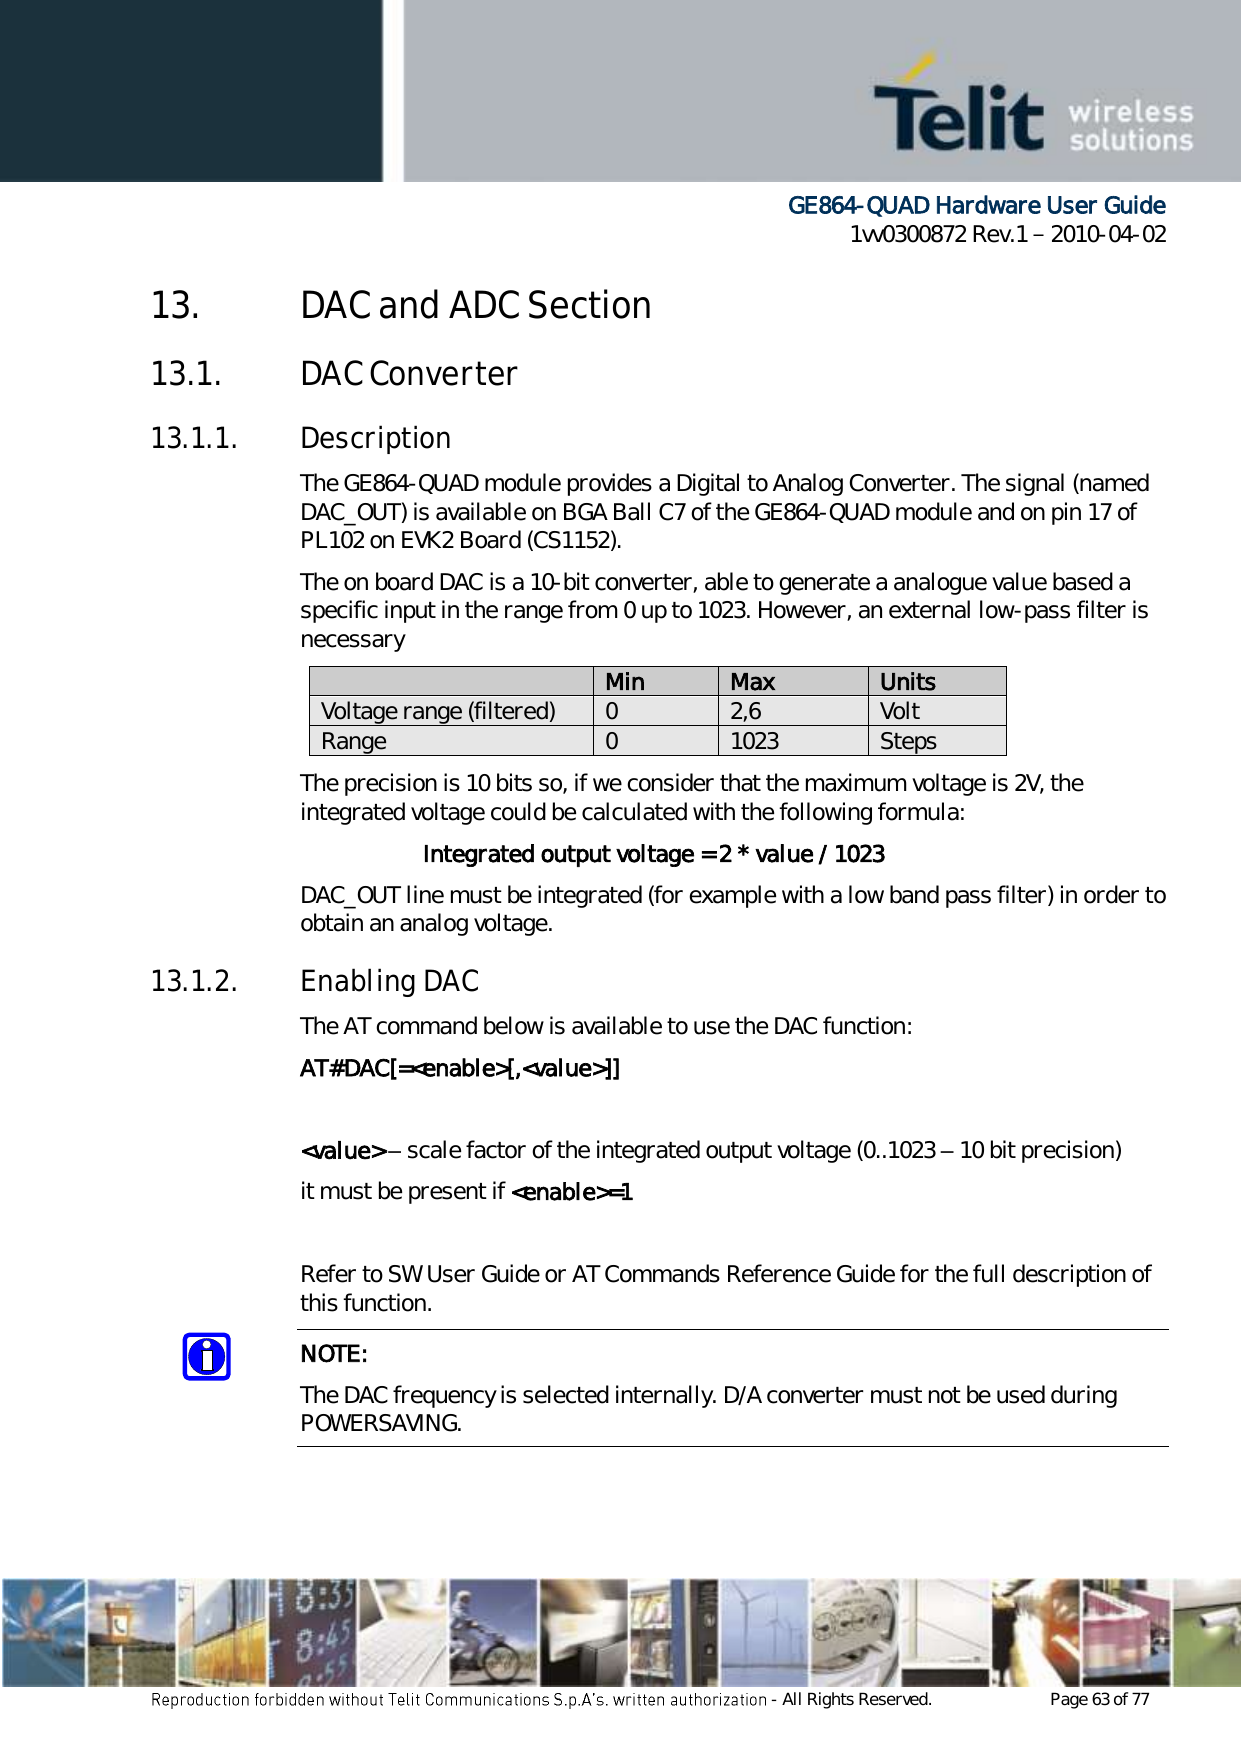      GE864-QUAD Hardware User Guide 1vv0300872 Rev.1   2010-04-02 - All Rights Reserved.    Page 63 of 77  13. DAC and ADC Section 13.1. DAC Converter 13.1.1. Description The GE864-QUAD module provides a Digital to Analog Converter. The signal (named DAC_OUT) is available on BGA Ball C7 of the GE864-QUAD module and on pin 17 of PL102 on EVK2 Board (CS1152). The on board DAC is a 10-bit converter, able to generate a analogue value based a specific input in the range from 0 up to 1023. However, an external low-pass filter is necessary  Min Max Units Voltage range (filtered) 0 2,6 Volt Range 0 1023 Steps The precision is 10 bits so, if we consider that the maximum voltage is 2V, the integrated voltage could be calculated with the following formula:   Integrated output voltage = 2 * value / 1023 DAC_OUT line must be integrated (for example with a low band pass filter) in order to obtain an analog voltage. 13.1.2. Enabling DAC The AT command below is available to use the DAC function: AT#DAC[=&lt;enable&gt;[,&lt;value&gt;]]  &lt;value&gt; – scale factor of the integrated output voltage (0..1023 – 10 bit precision) it must be present if &lt;enable&gt;=1  Refer to SW User Guide or AT Commands Reference Guide for the full description of this function. NOTE: The DAC frequency is selected internally. D/A converter must not be used during POWERSAVING. 